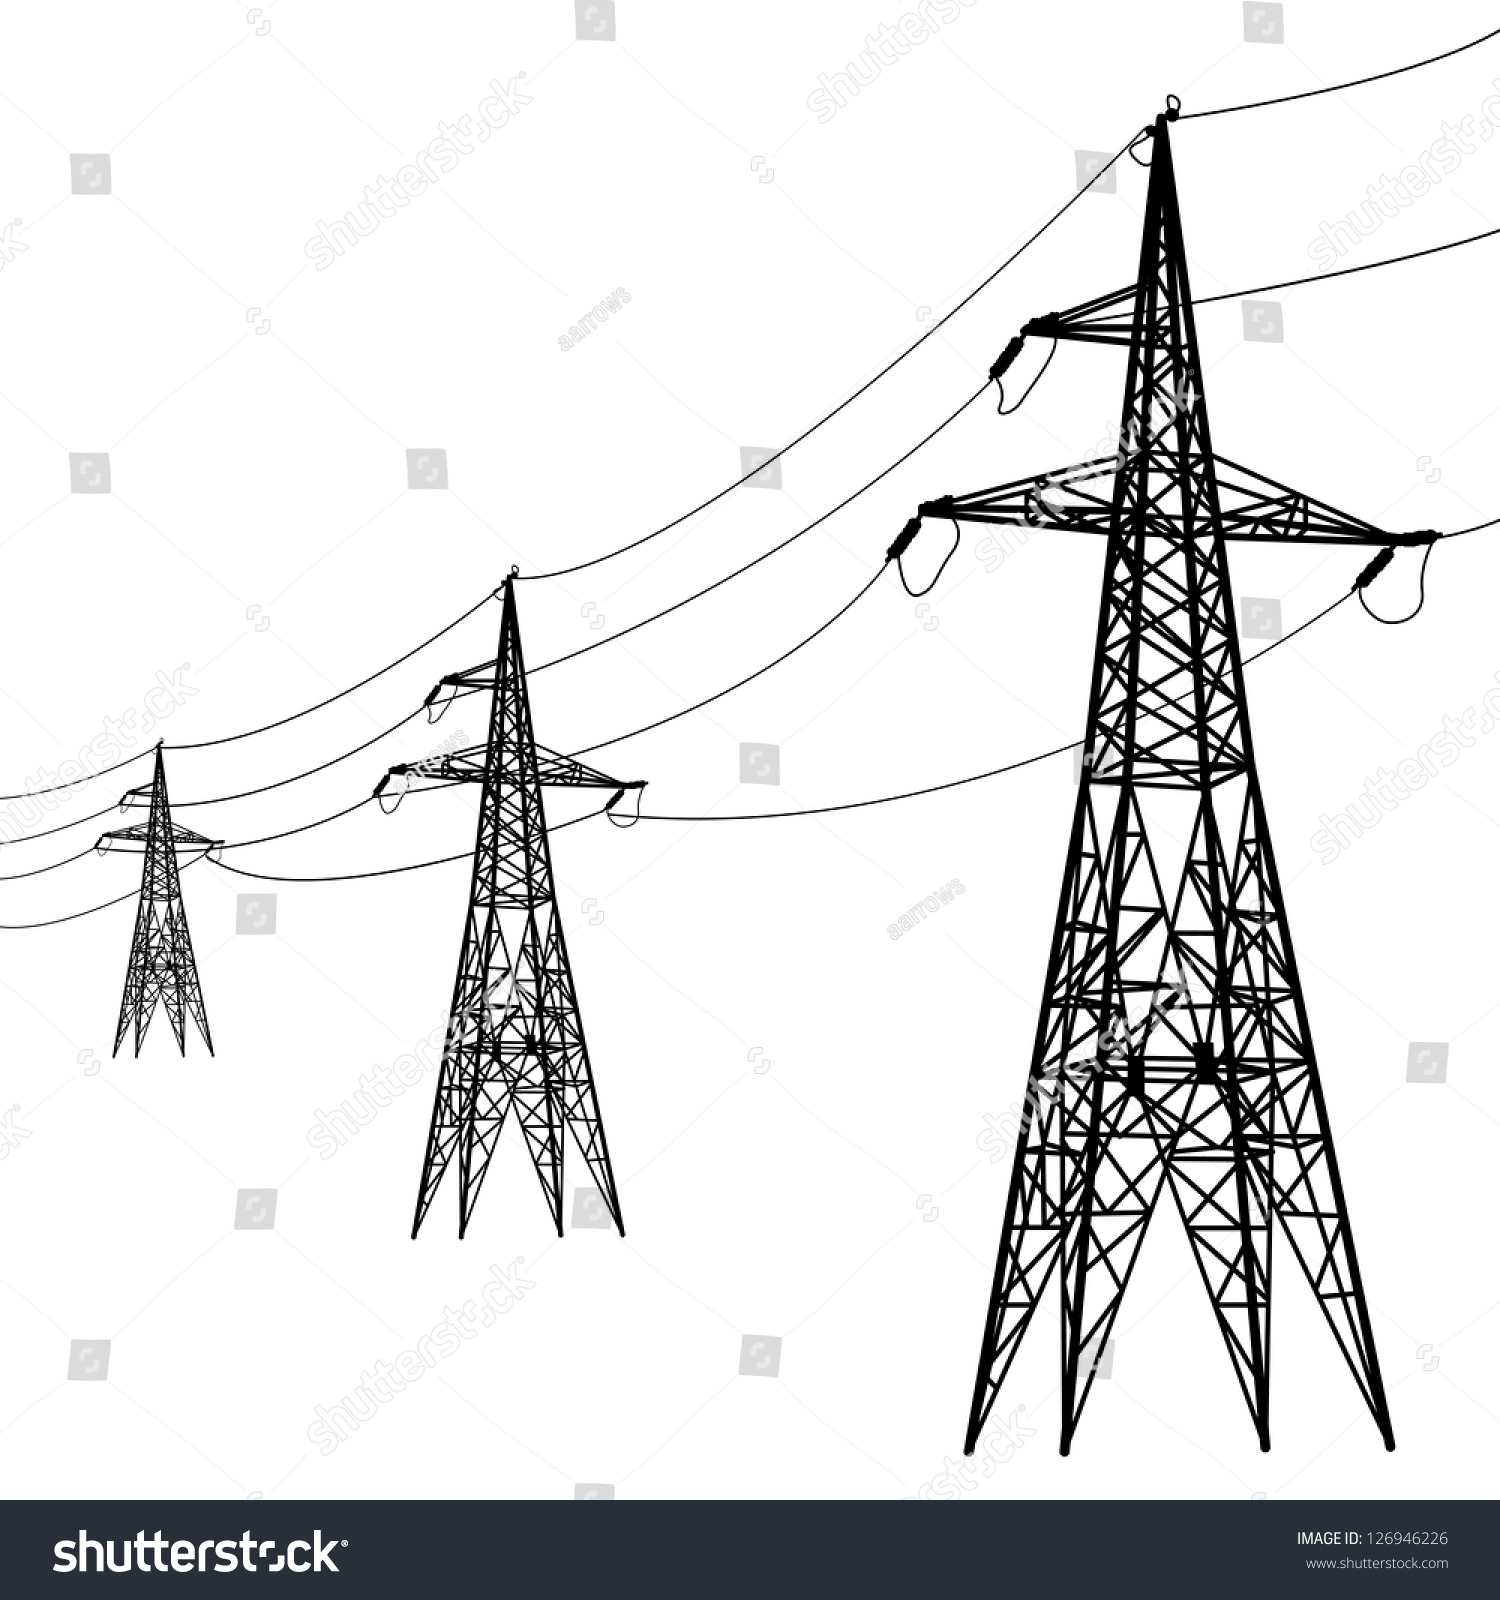 Electricity lines silhouette photo